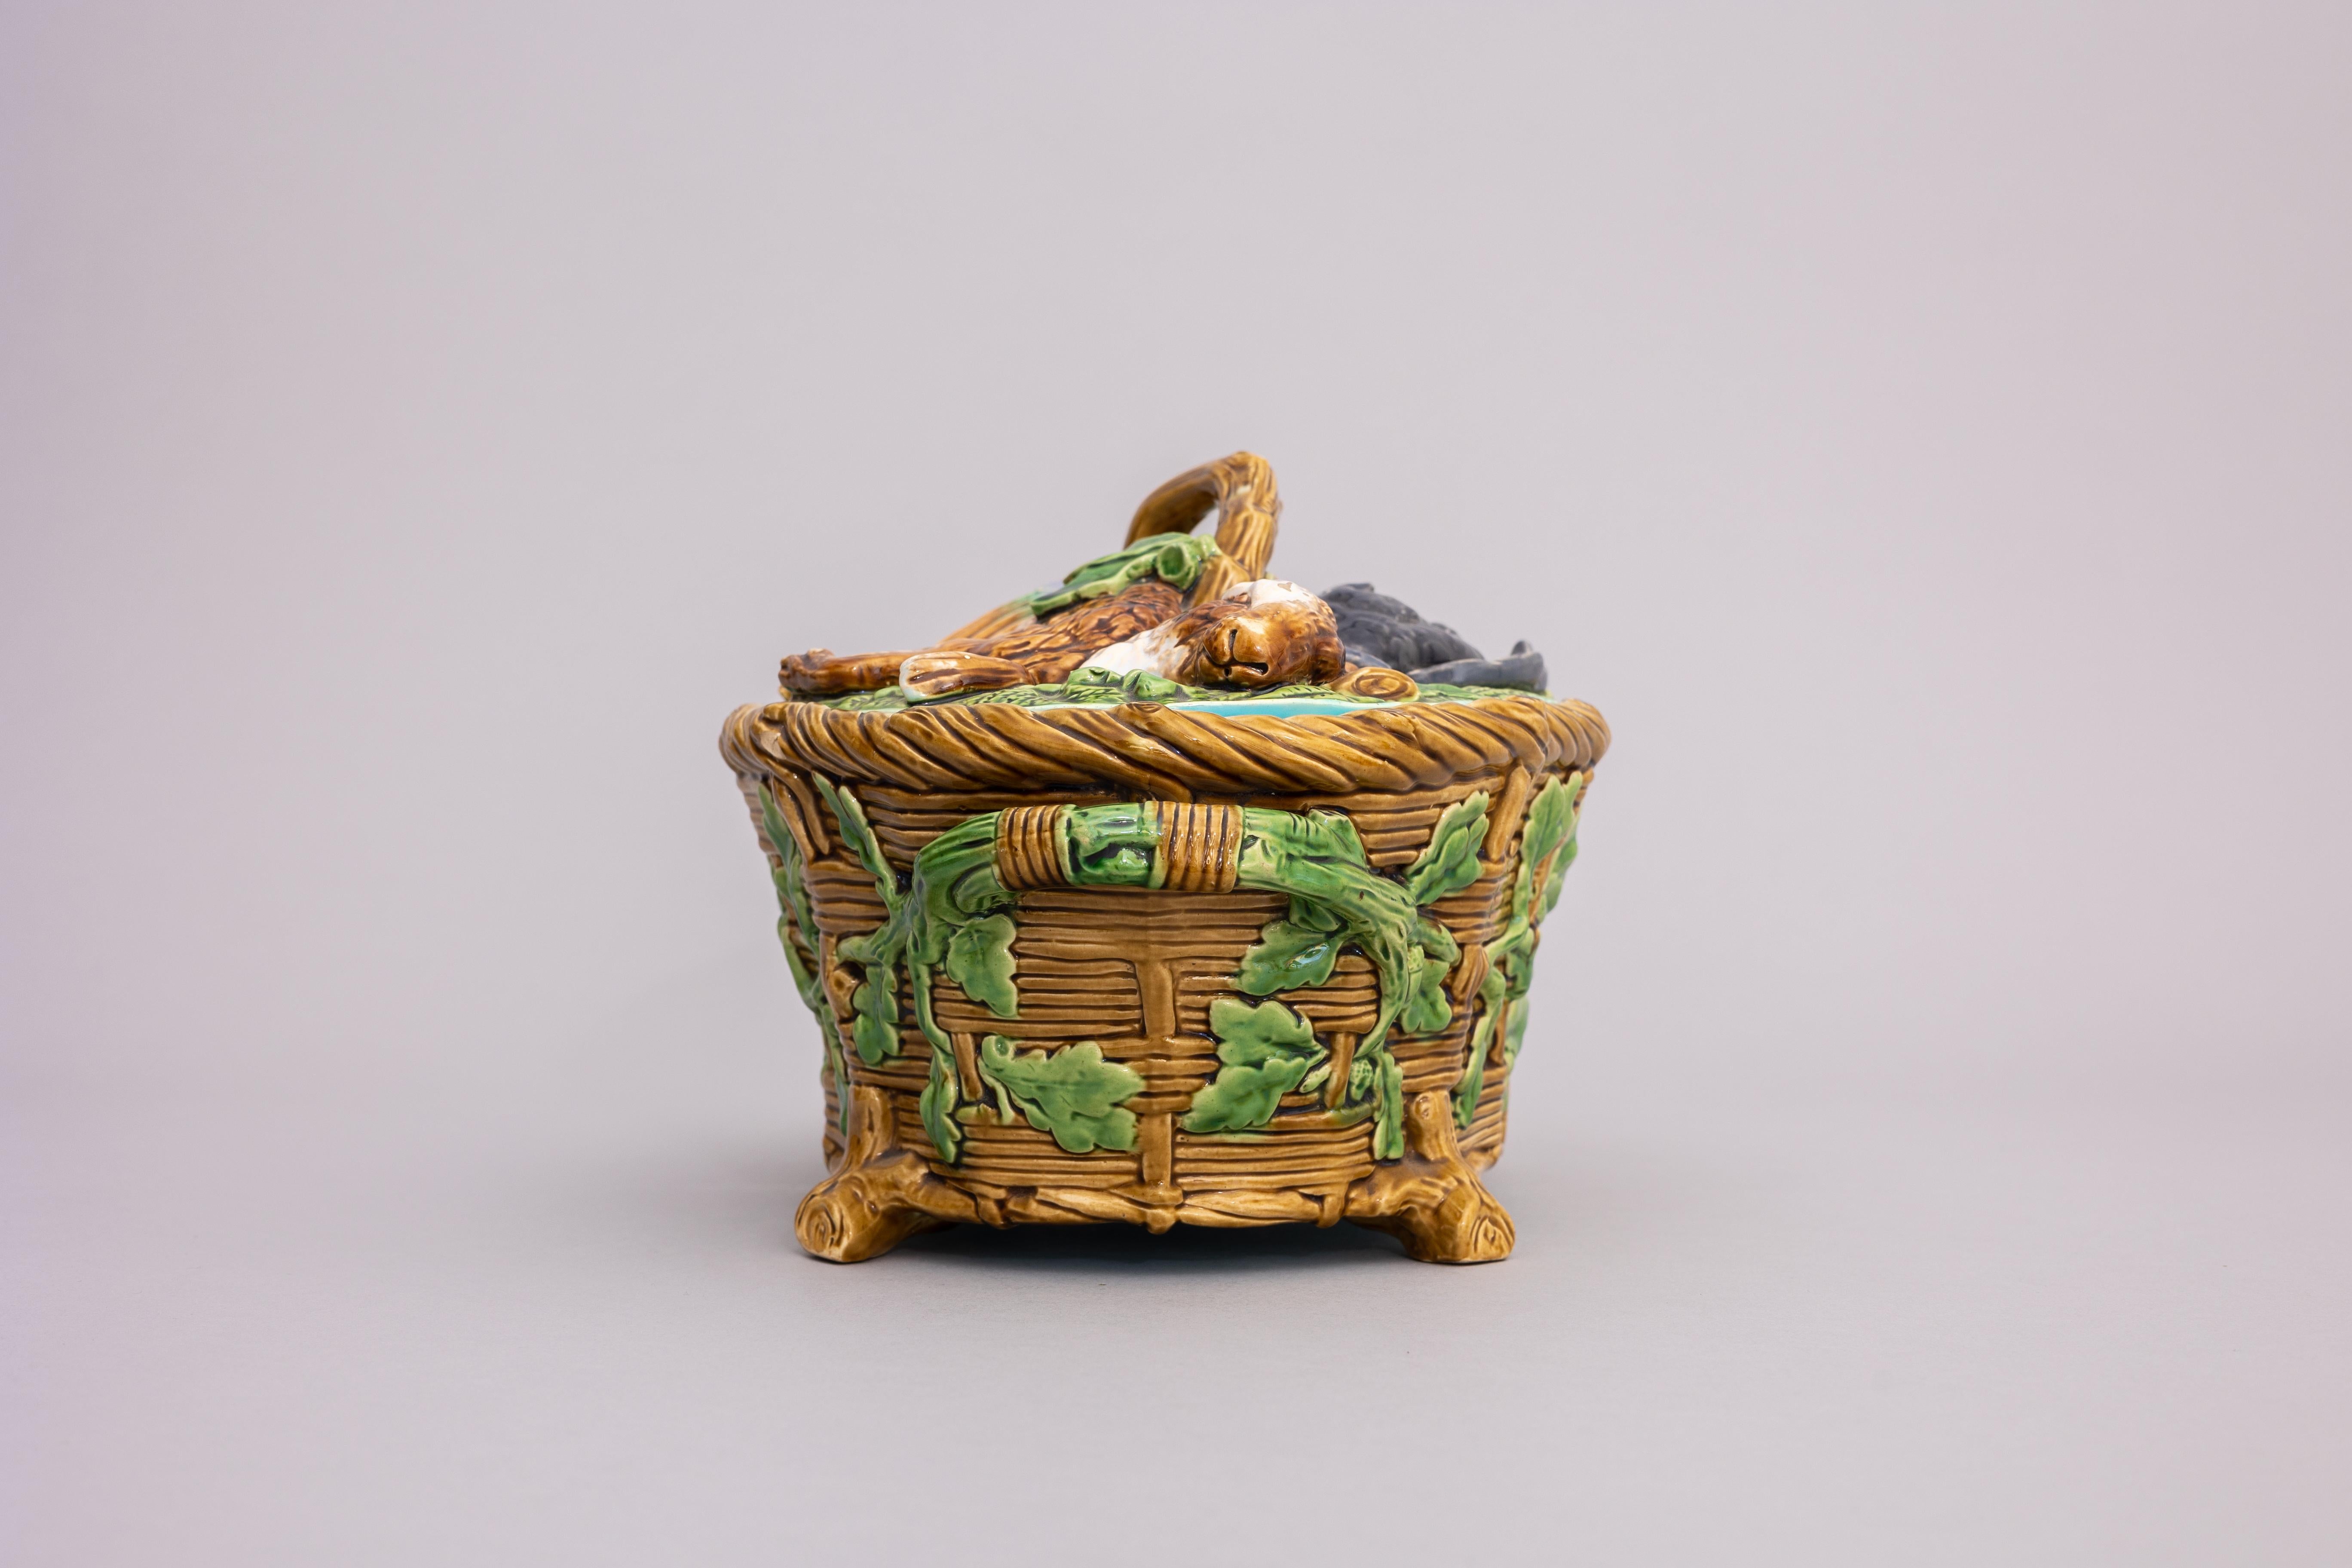 A majolica game pie dish made by Minton & Co. in 1864. The dish takes the form of a wicker basket and is covered with oak leaves, acorns, vines, and ferns. The dish’s lid features a group of realistically molded dead game: a rabbit, a mallard, and a